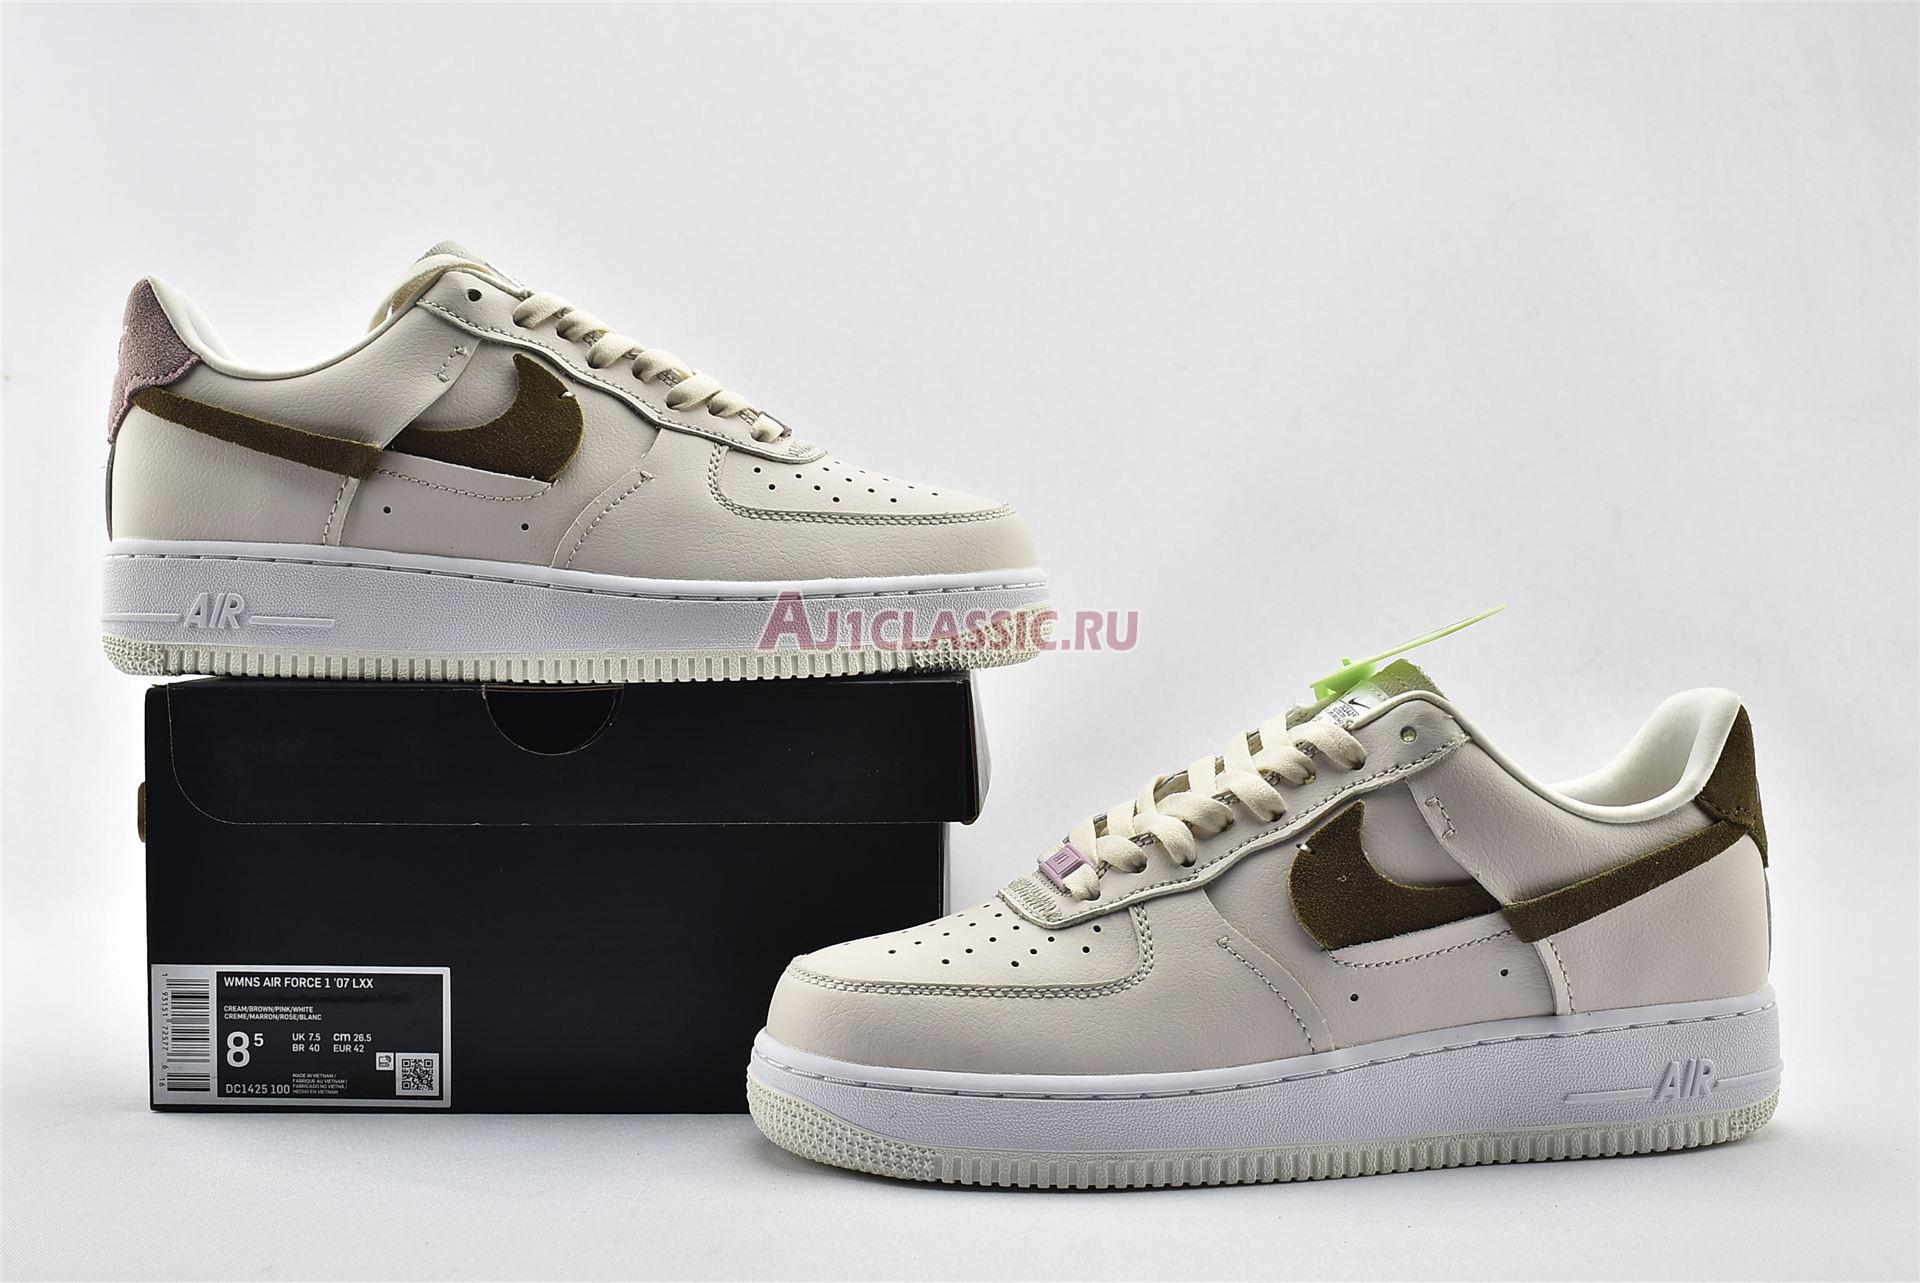 Nike Air Force 1 Low Vandalized "Light Orewood Brown" DC1425-100